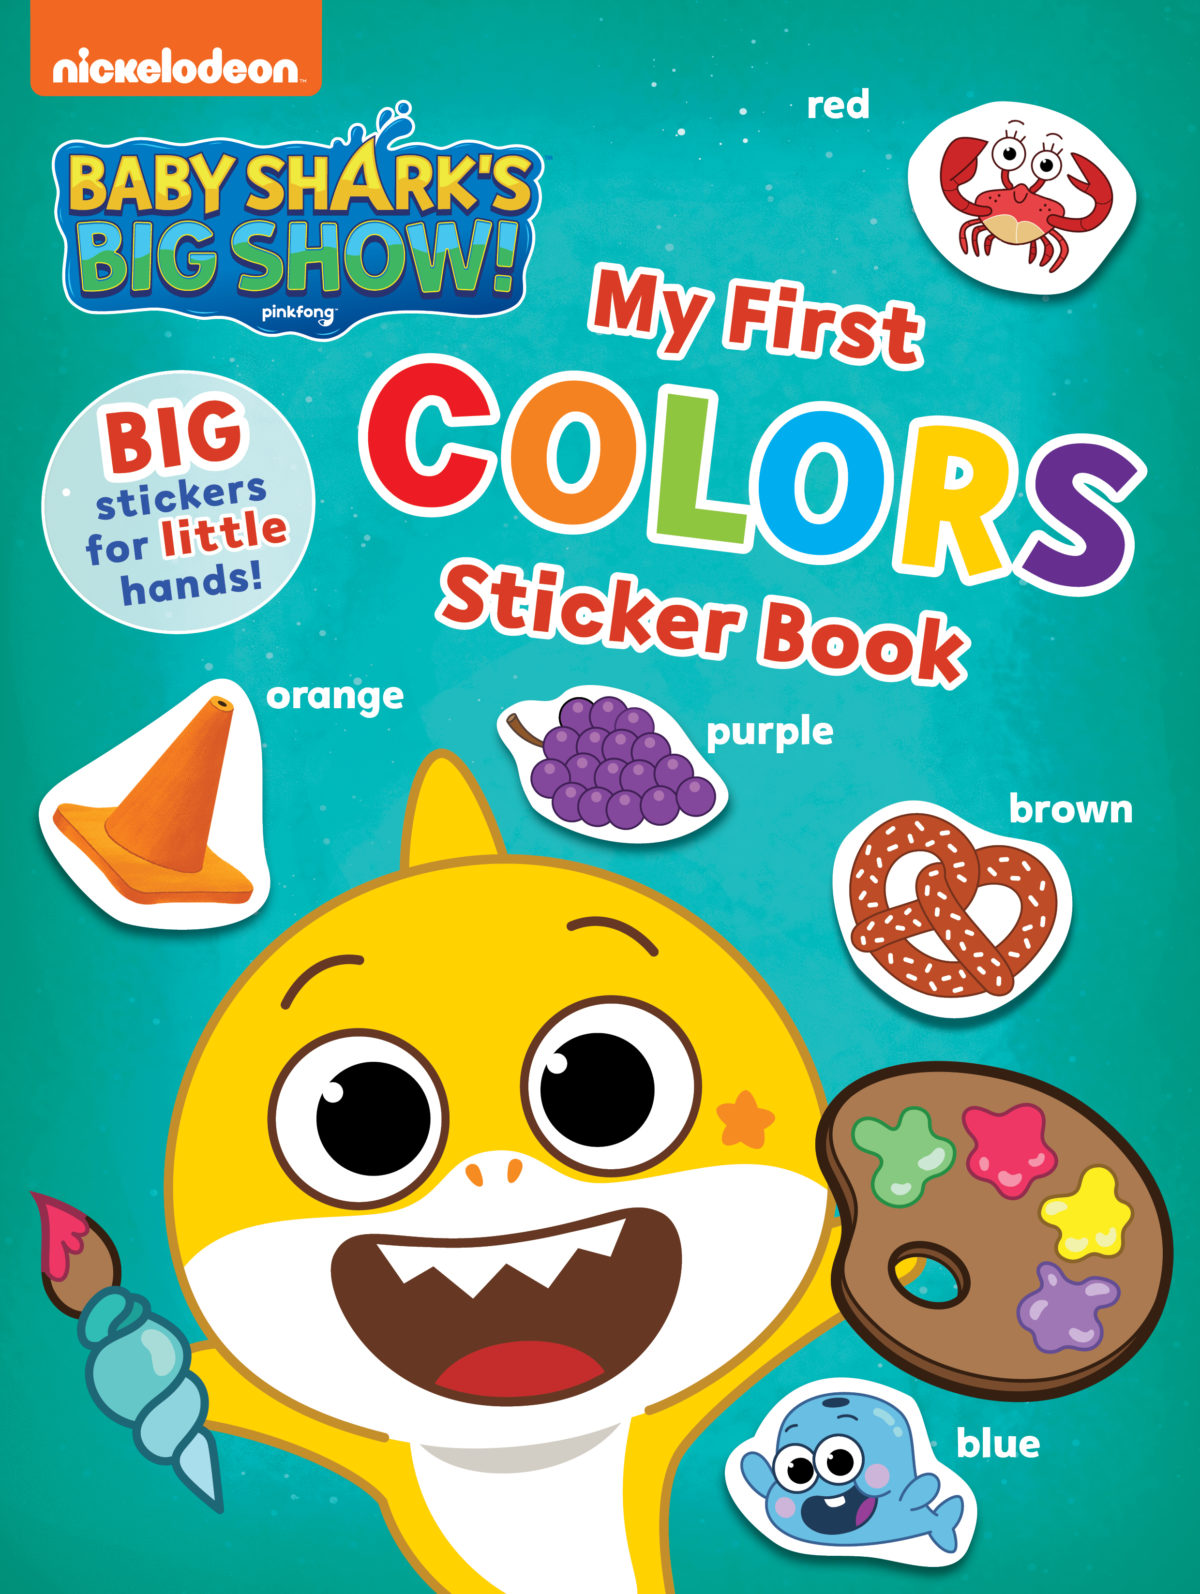 Baby Shark’s Big Show!: My First Colors Sticker Book